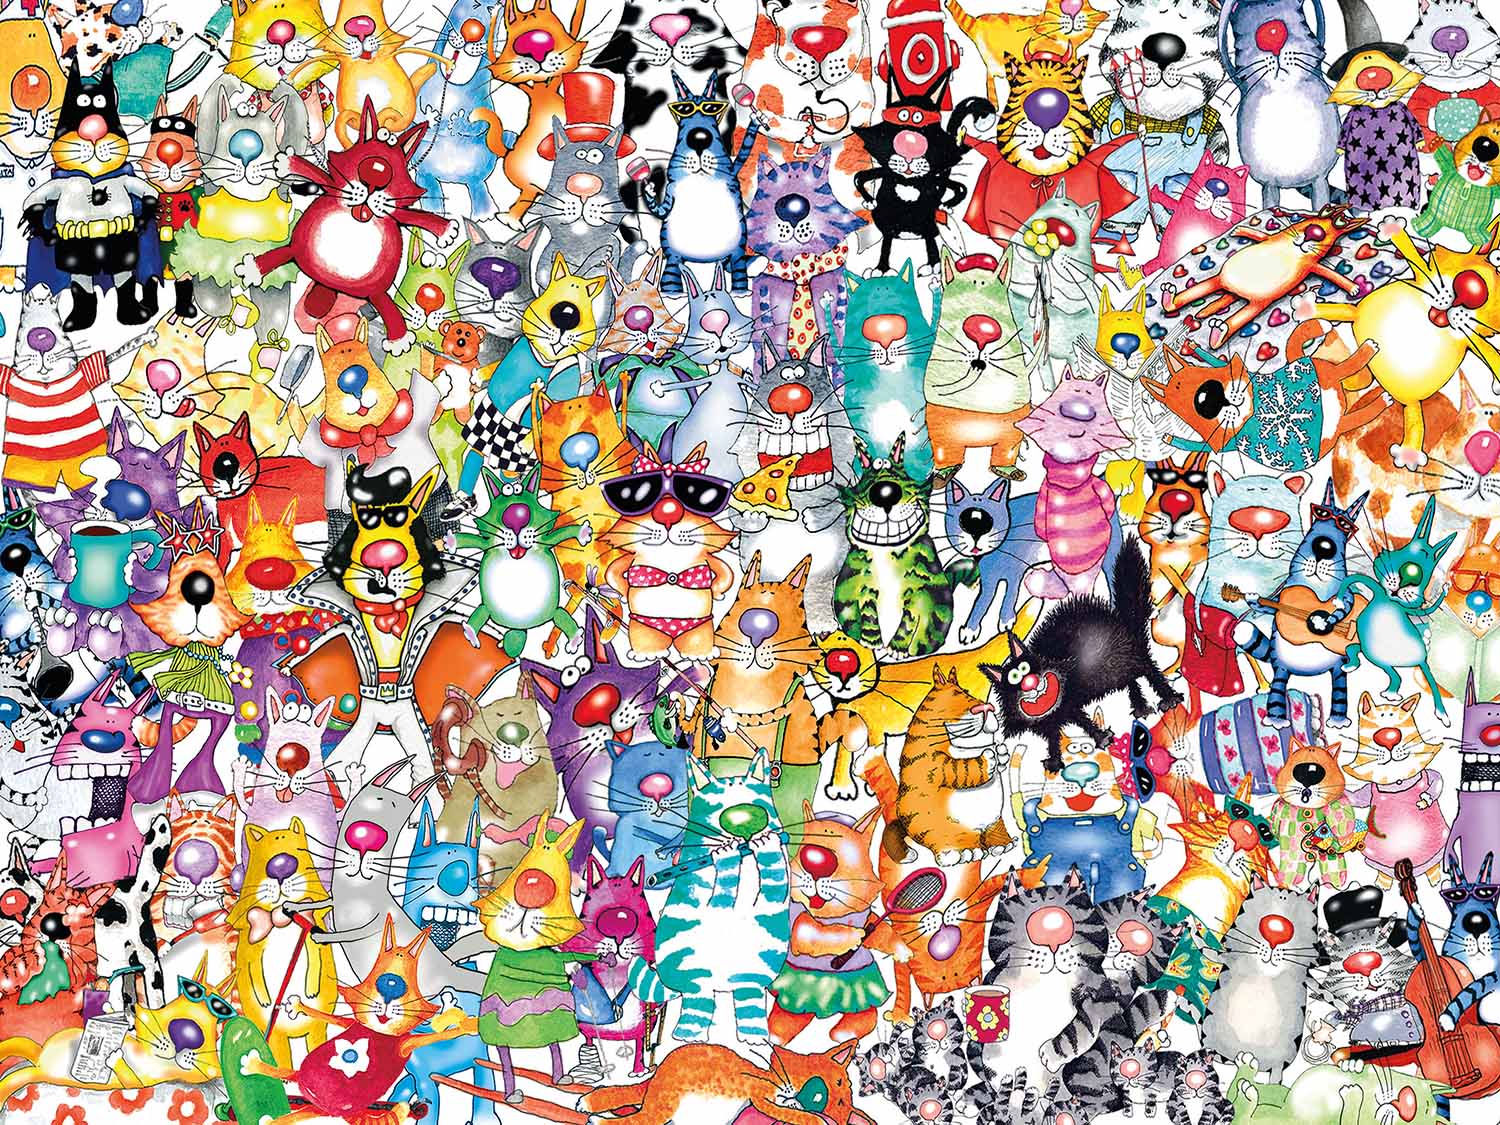 One Hundred and One - One Hundred Cats and a Fish Animals Jigsaw Puzzle